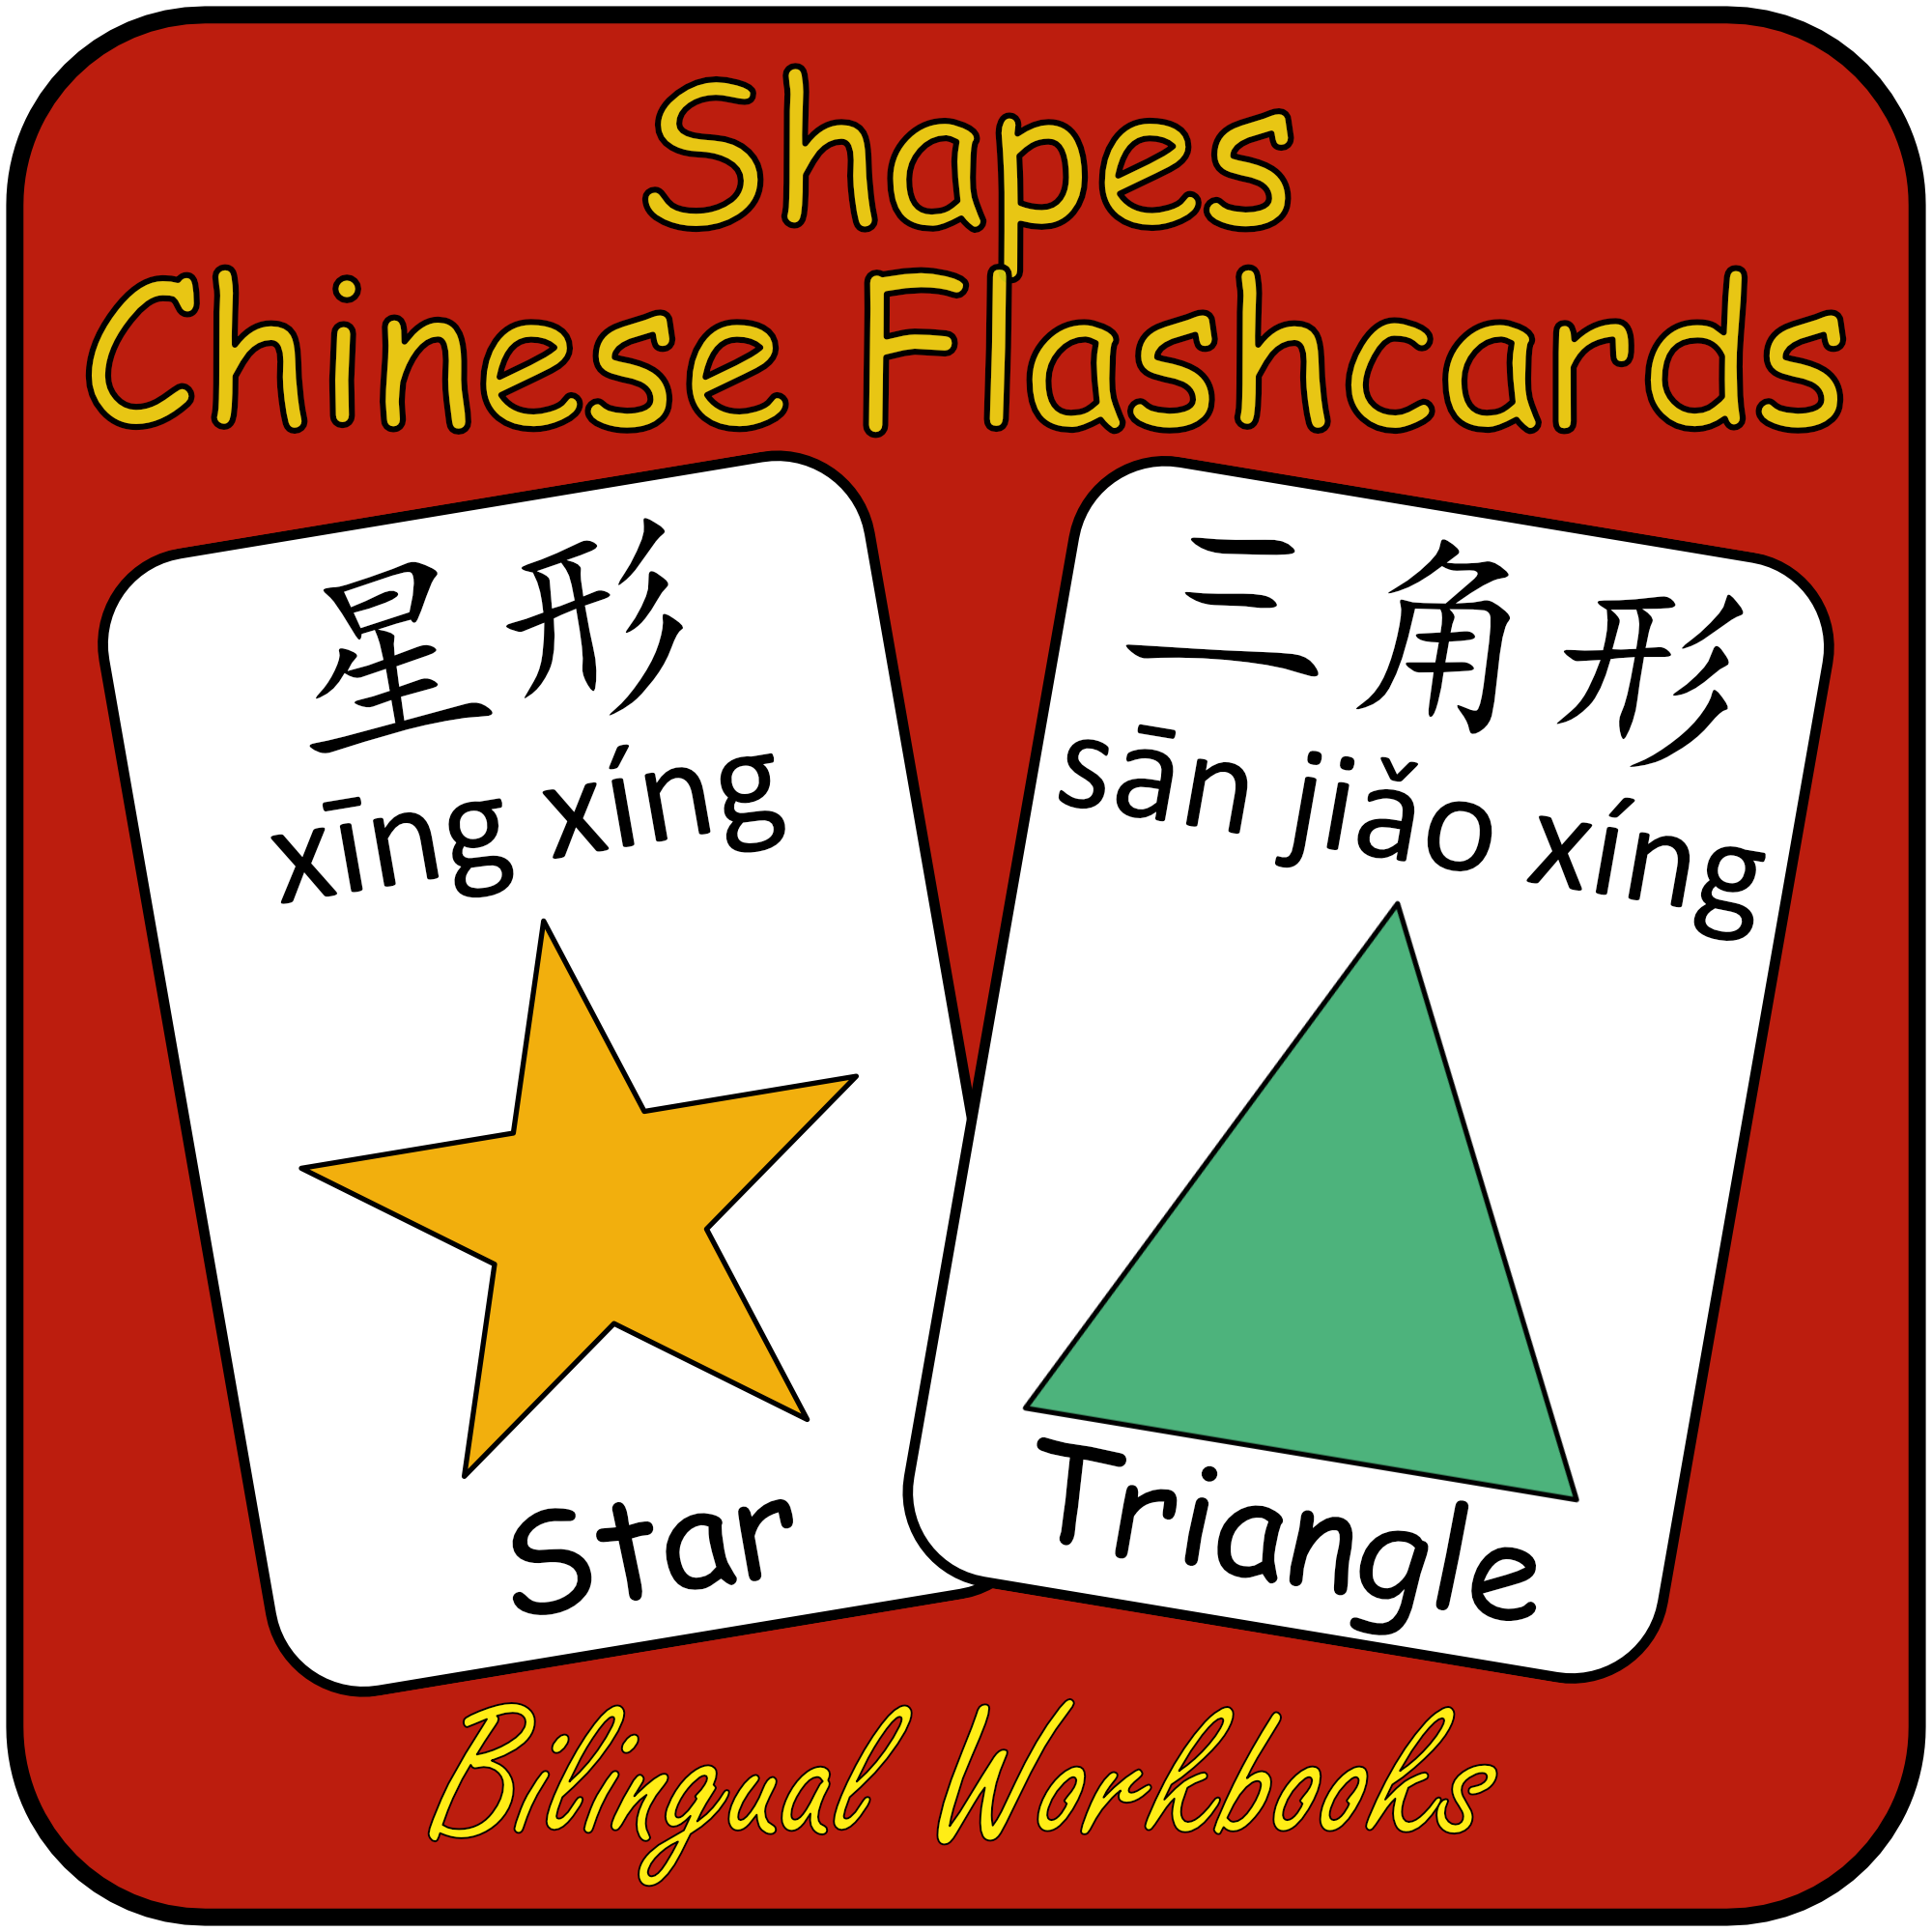 Mandarin Chinese First Words Flashcards - Shapes flash cards with English name, Simplified Chinese Character and Pinyin